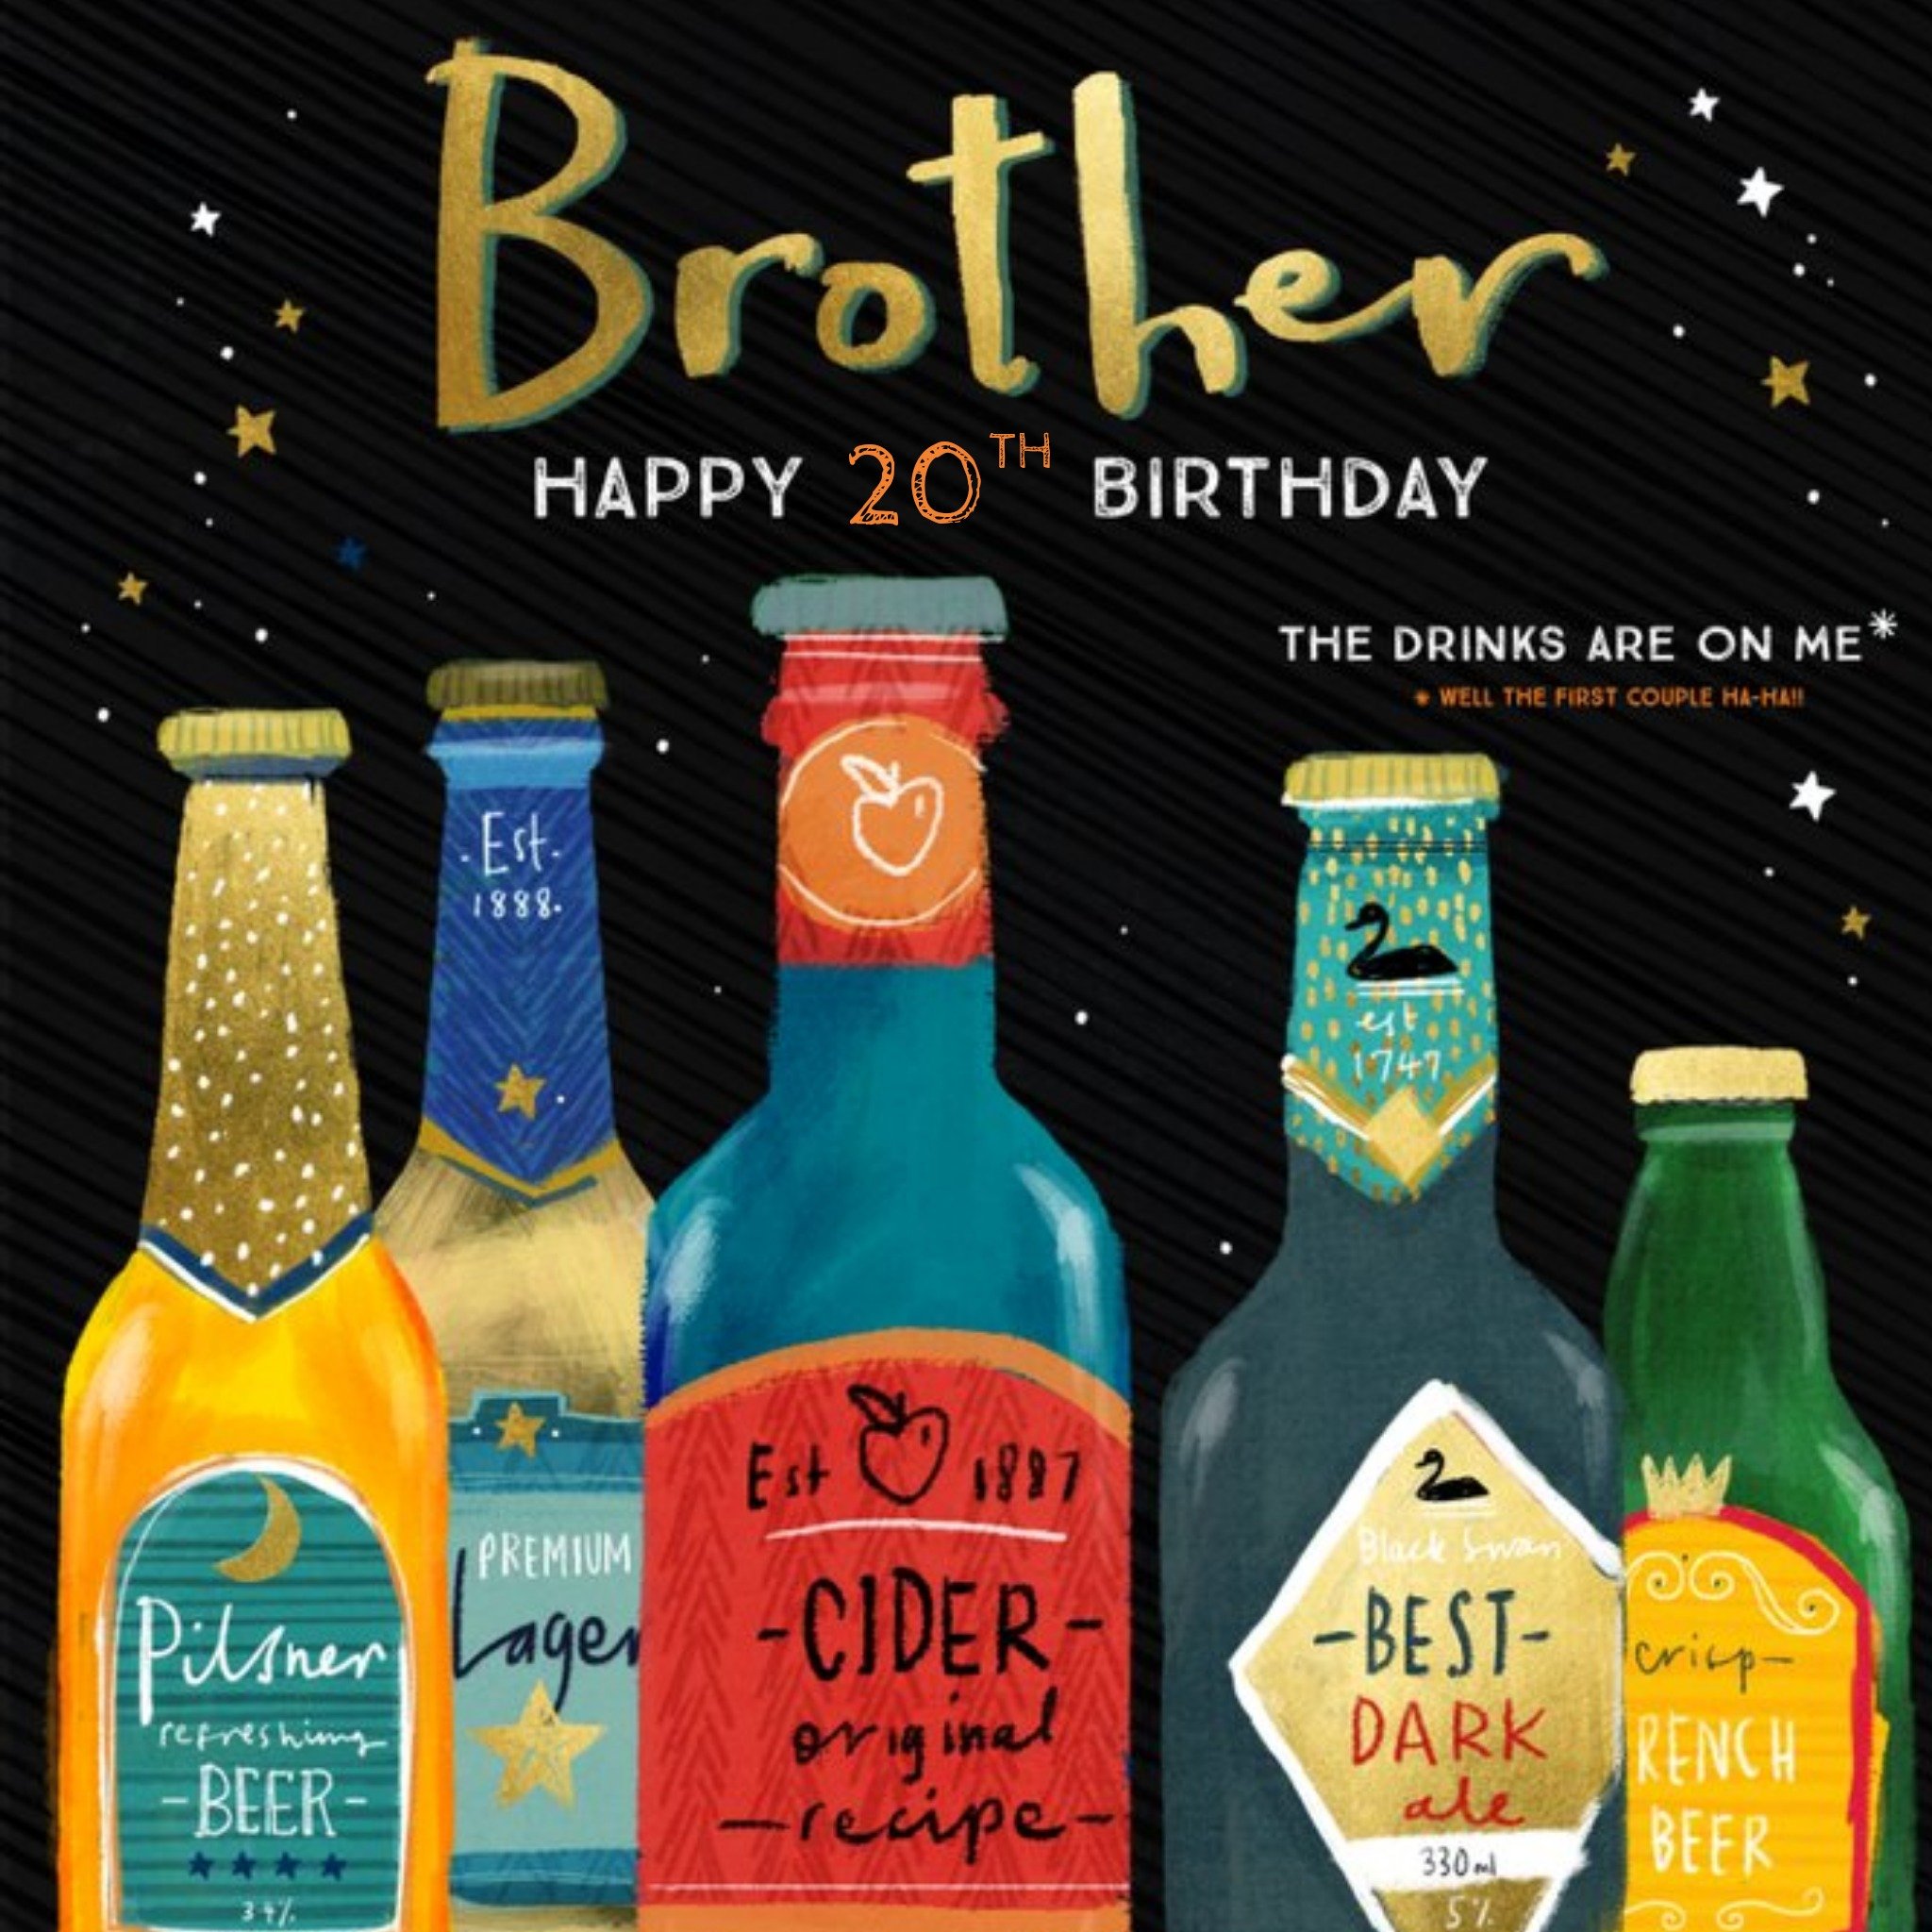 Moonpig Bottles Of Beer Illustration The Drinks Are On Me Funny Birthday Card, Large